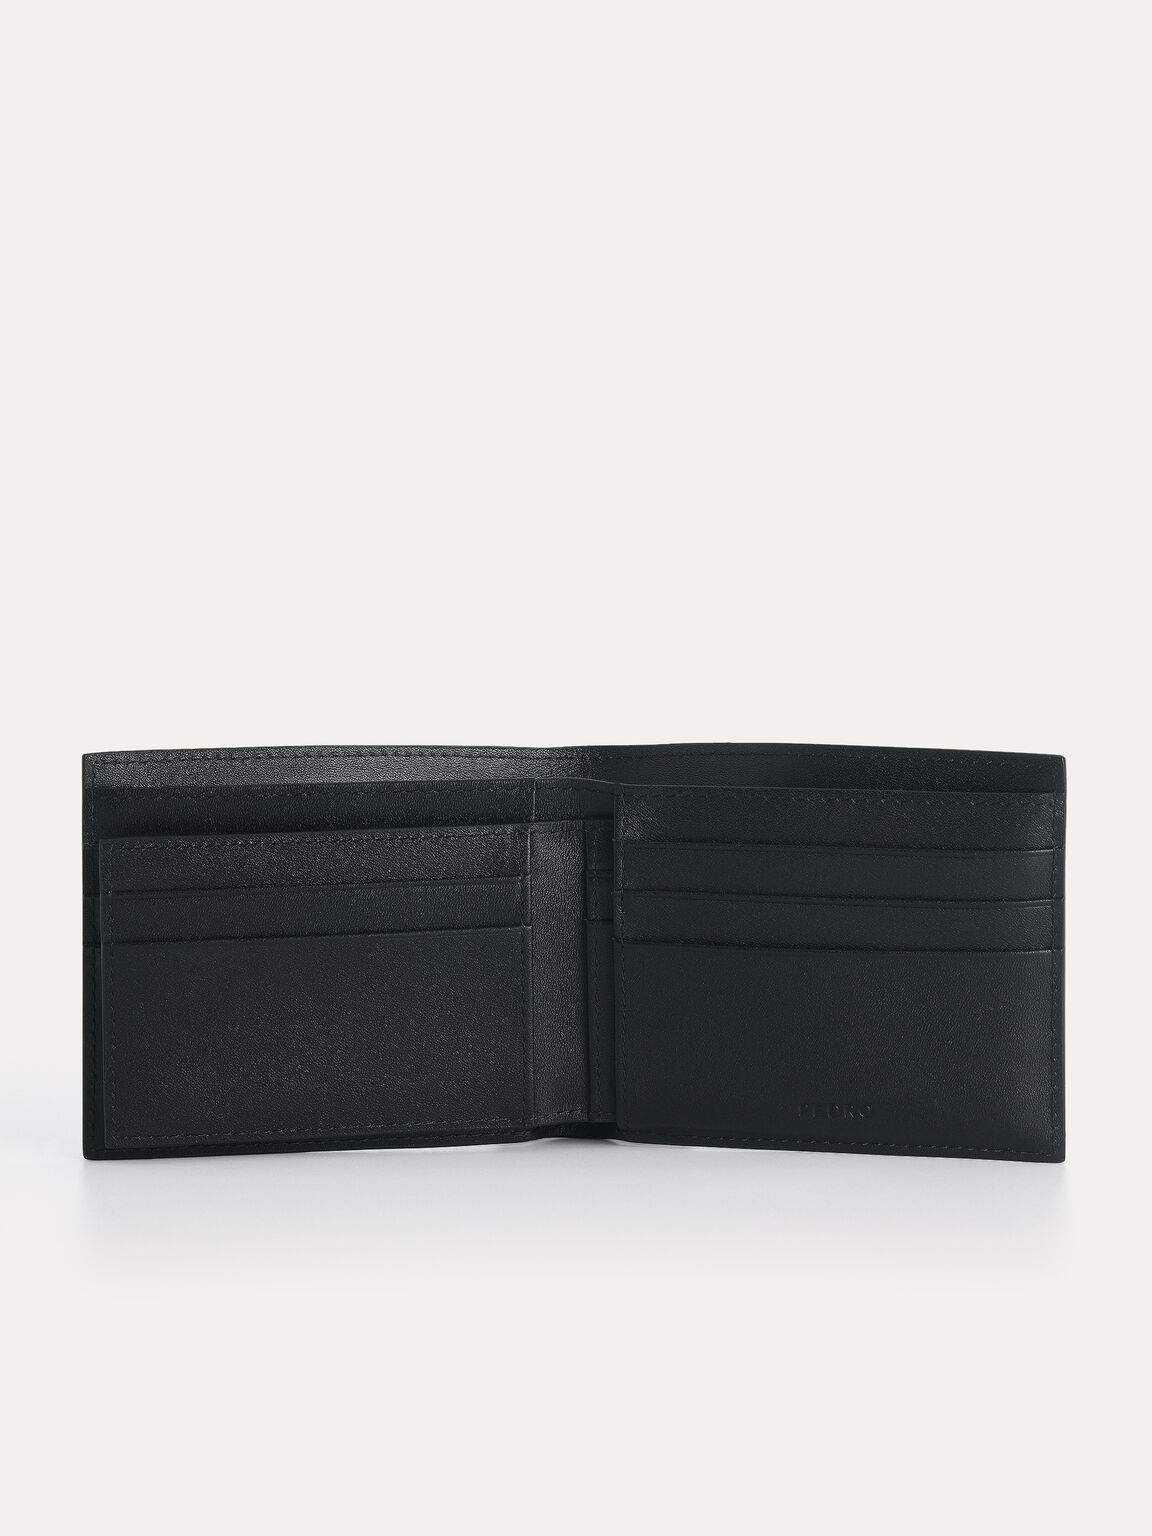 Textured Leather Bi-Fold Wallet with Insert, Black, hi-res